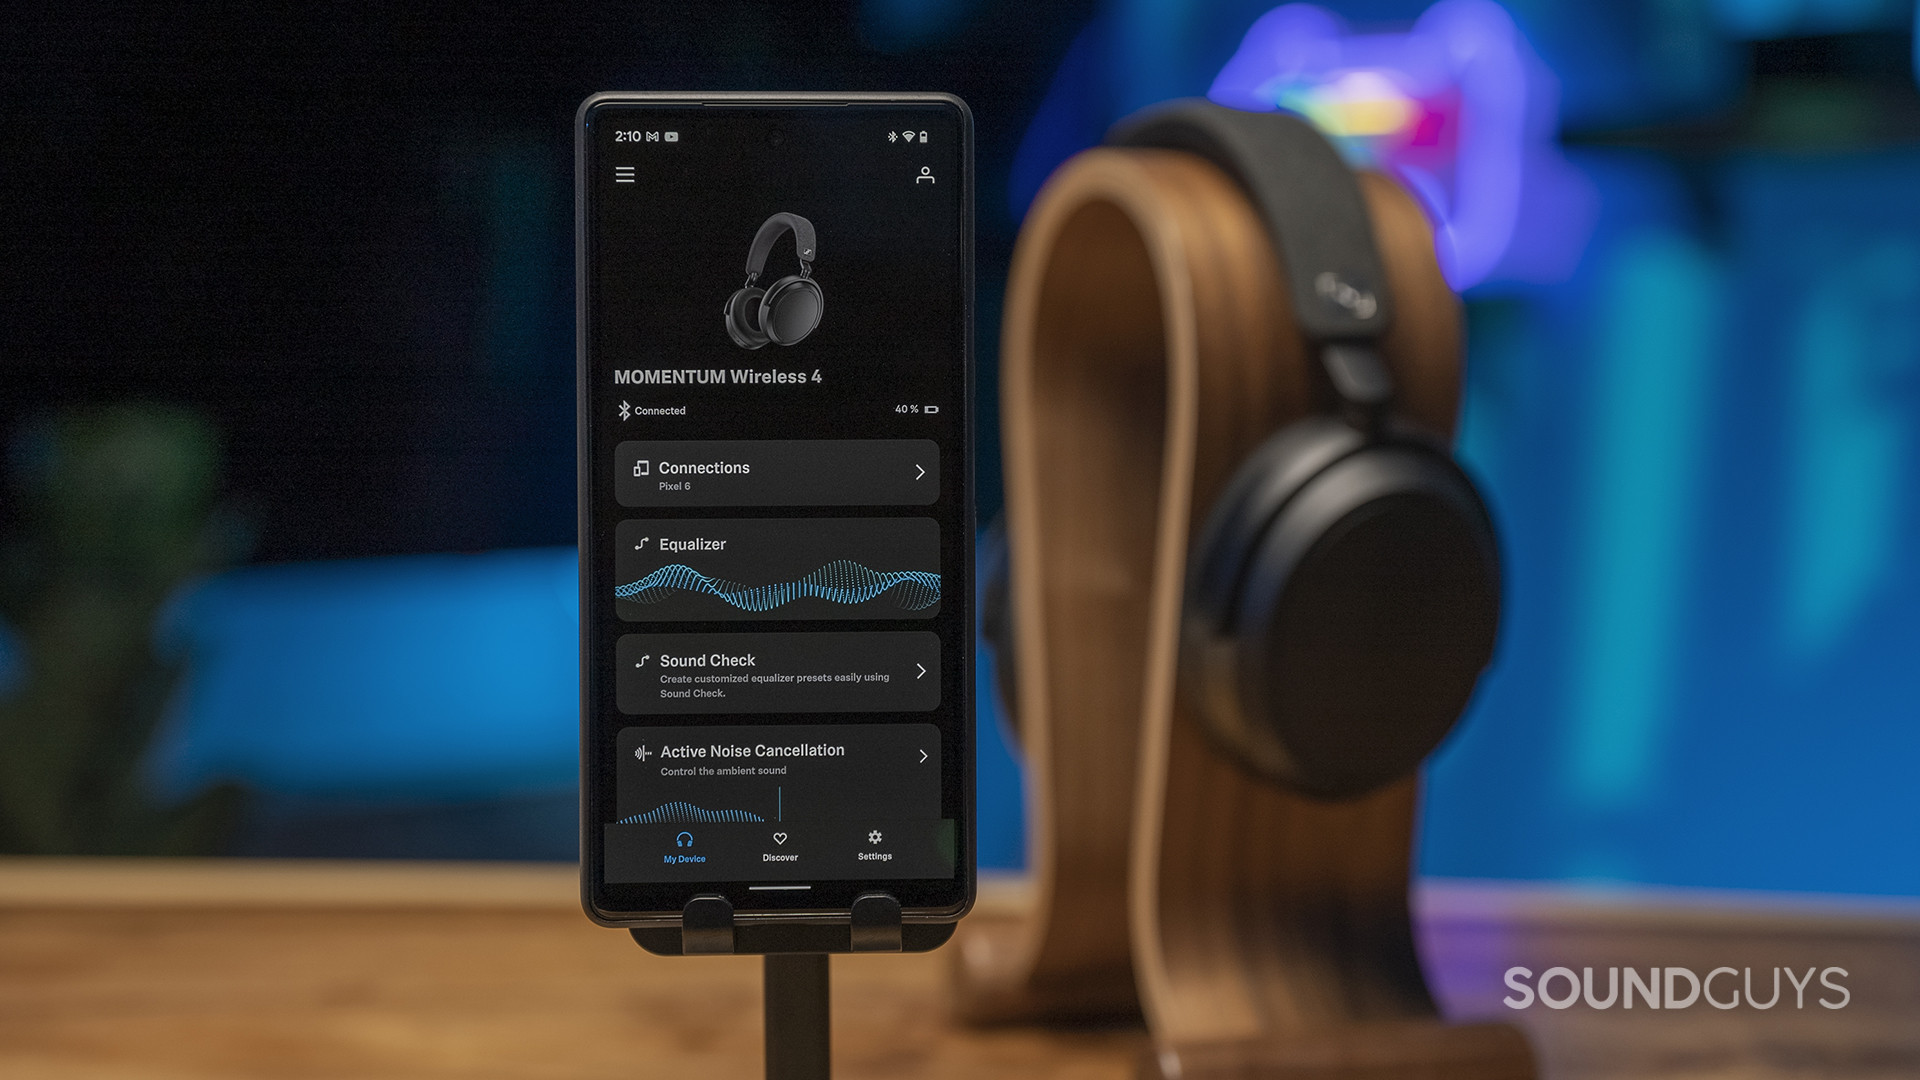 The Sennheiser Momentum 4 Wireless sits on a headphone stand in background with a phone displaying the Sennheiser Smart Control app displayed.